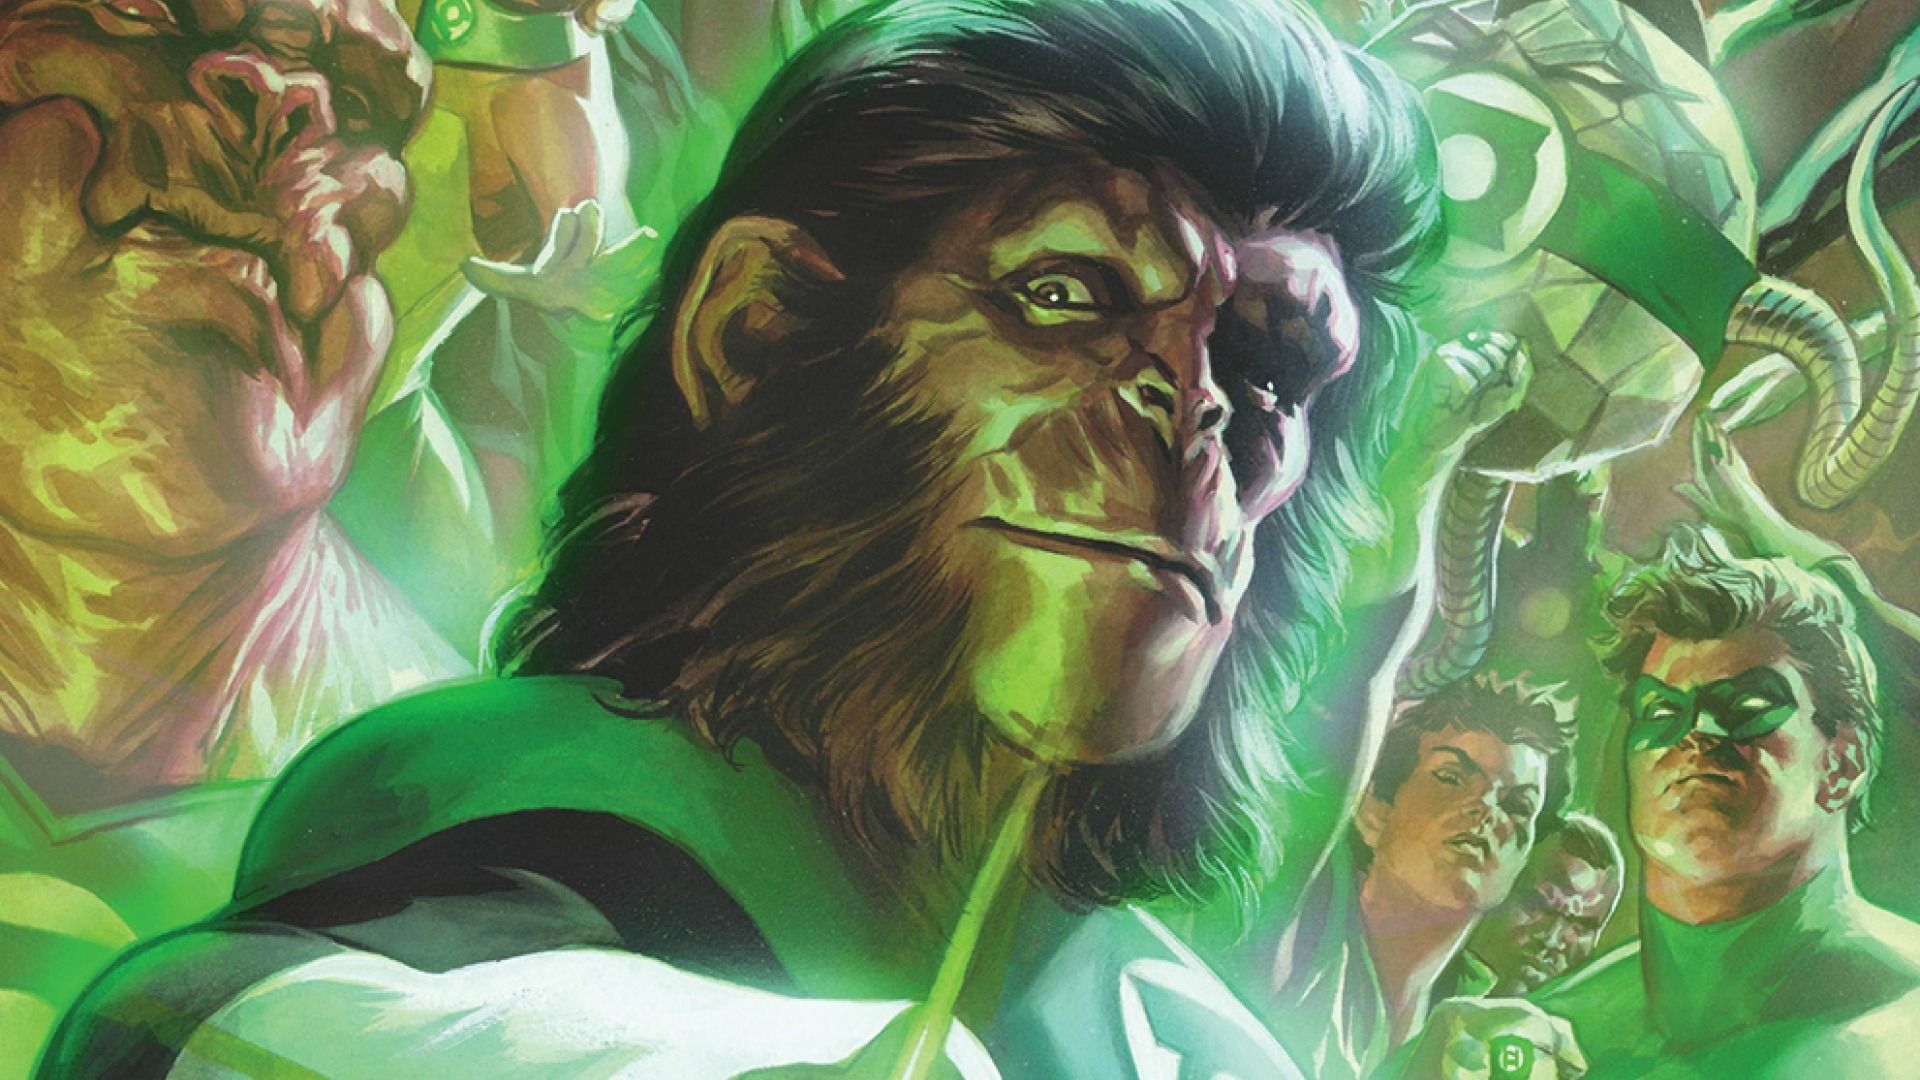 Planet Of The Apes And Green Lantern Team Up For Crazy Crossover